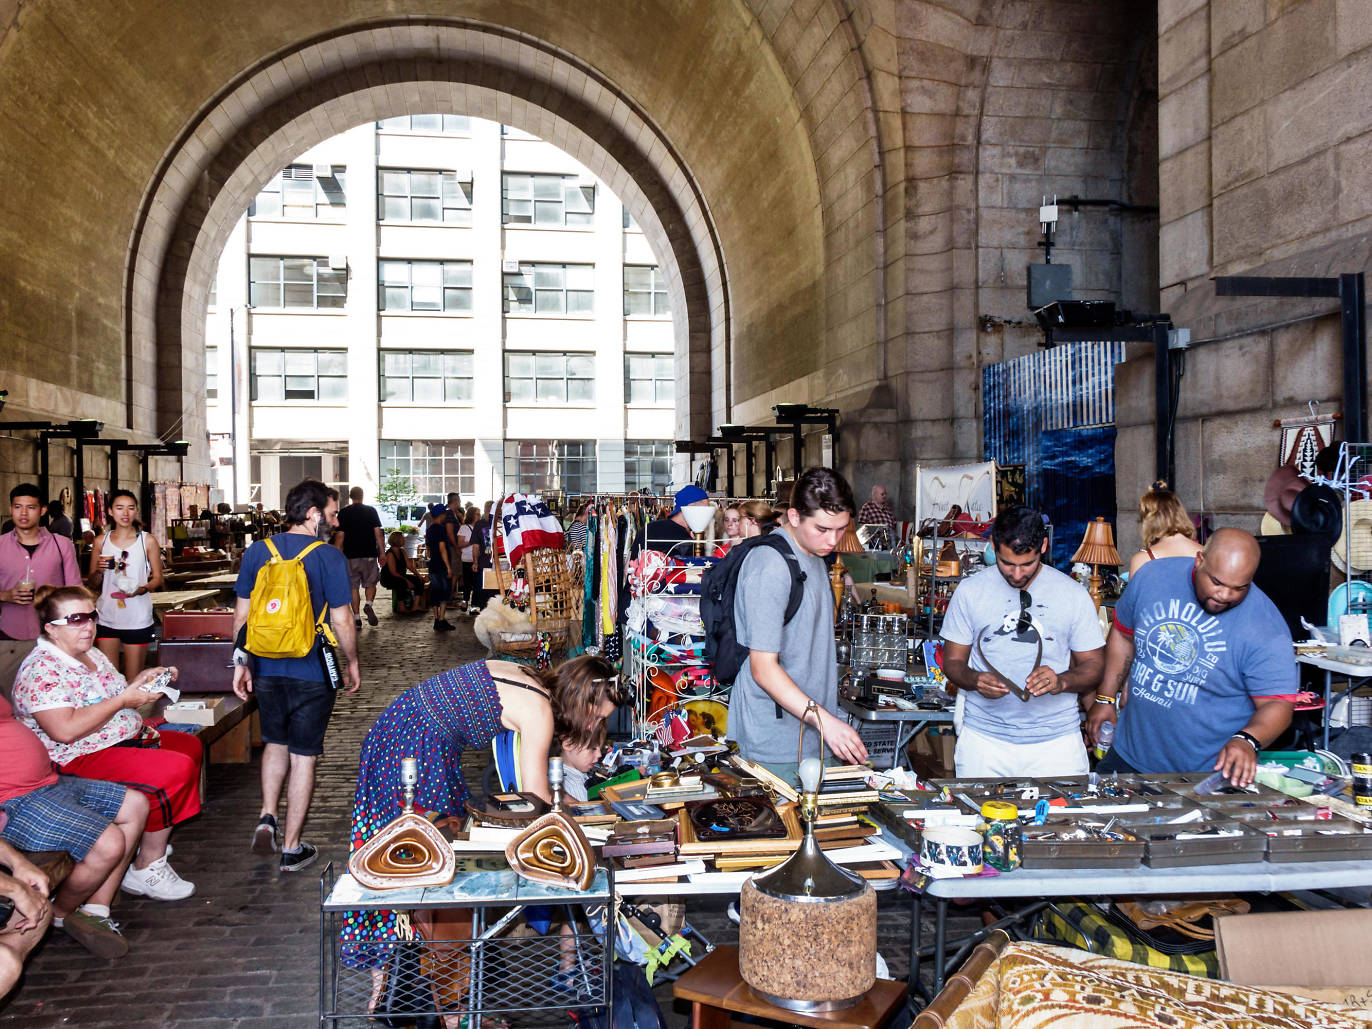 Best Flea Markets NYC Has to Offer For Vintage, Antiques and More